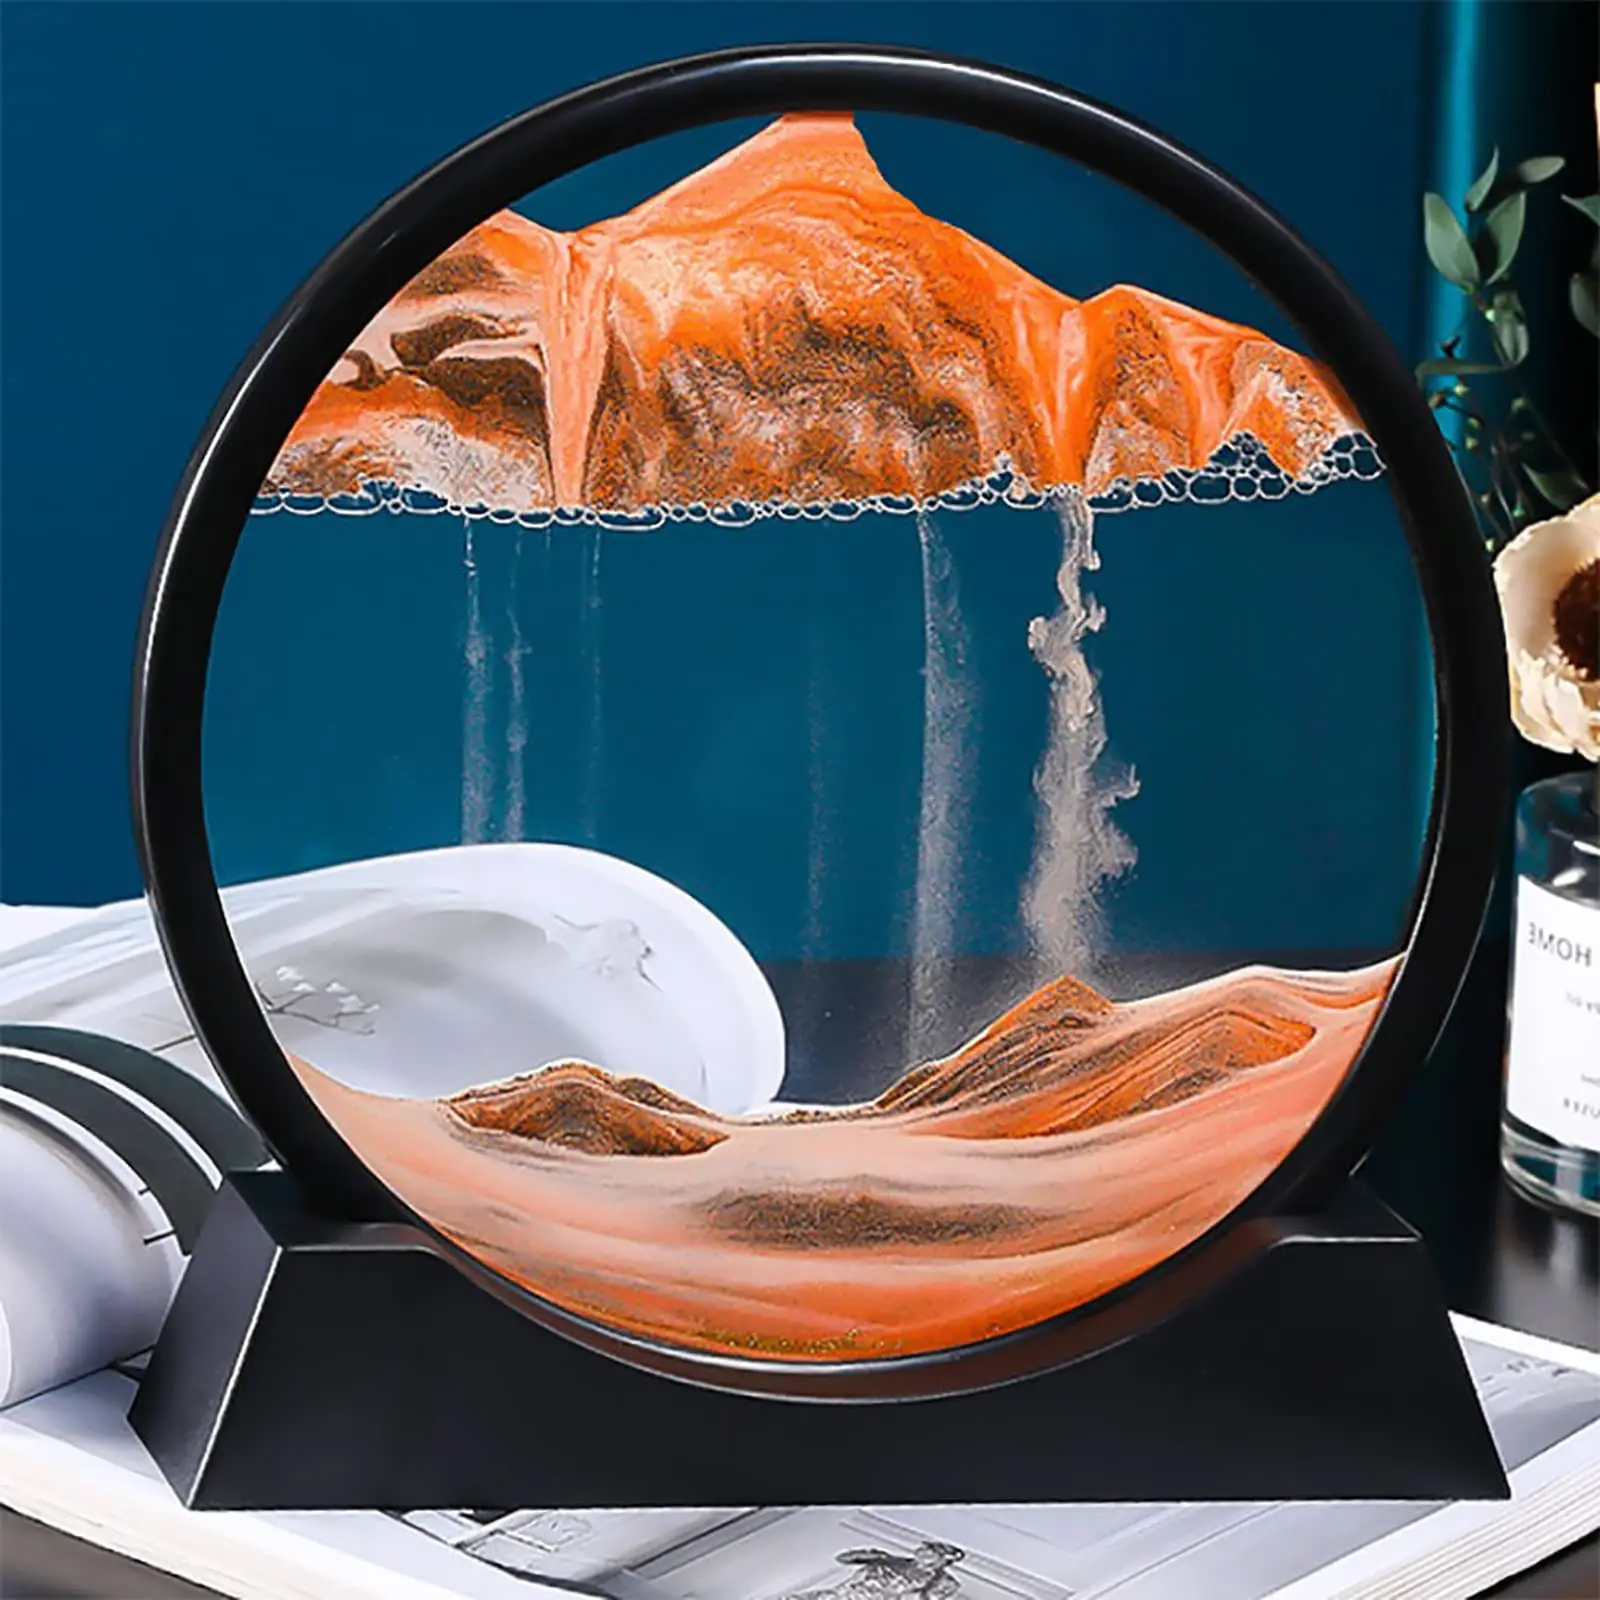 7 Inch Moving Sand Art Picture Round Glass 3D Sand Art Liquid Motion Display Stand Large Desktop Art Toyshome Office Work Decor